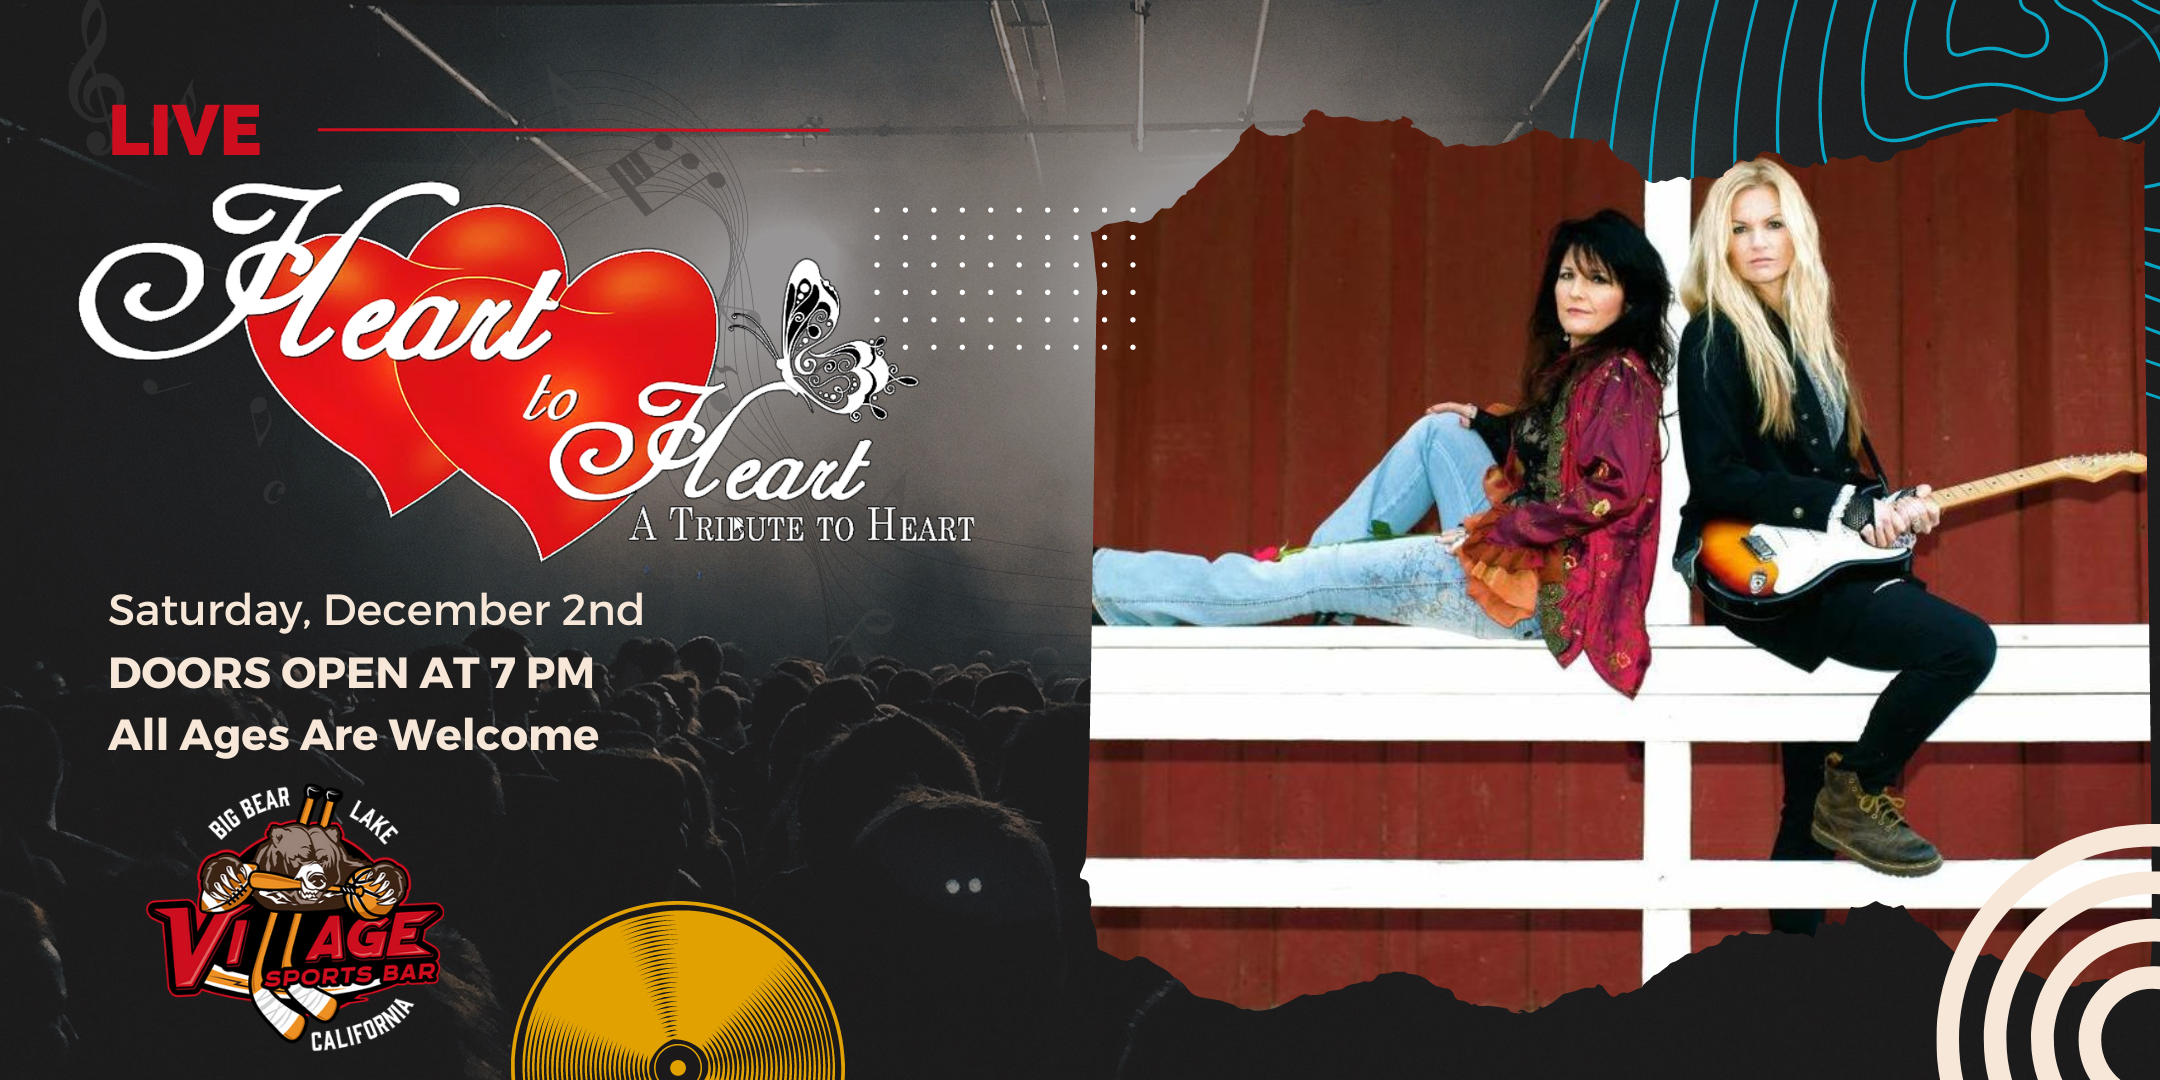 Village Sports Bar Presents: Heart to Heart: Tribute to Heart